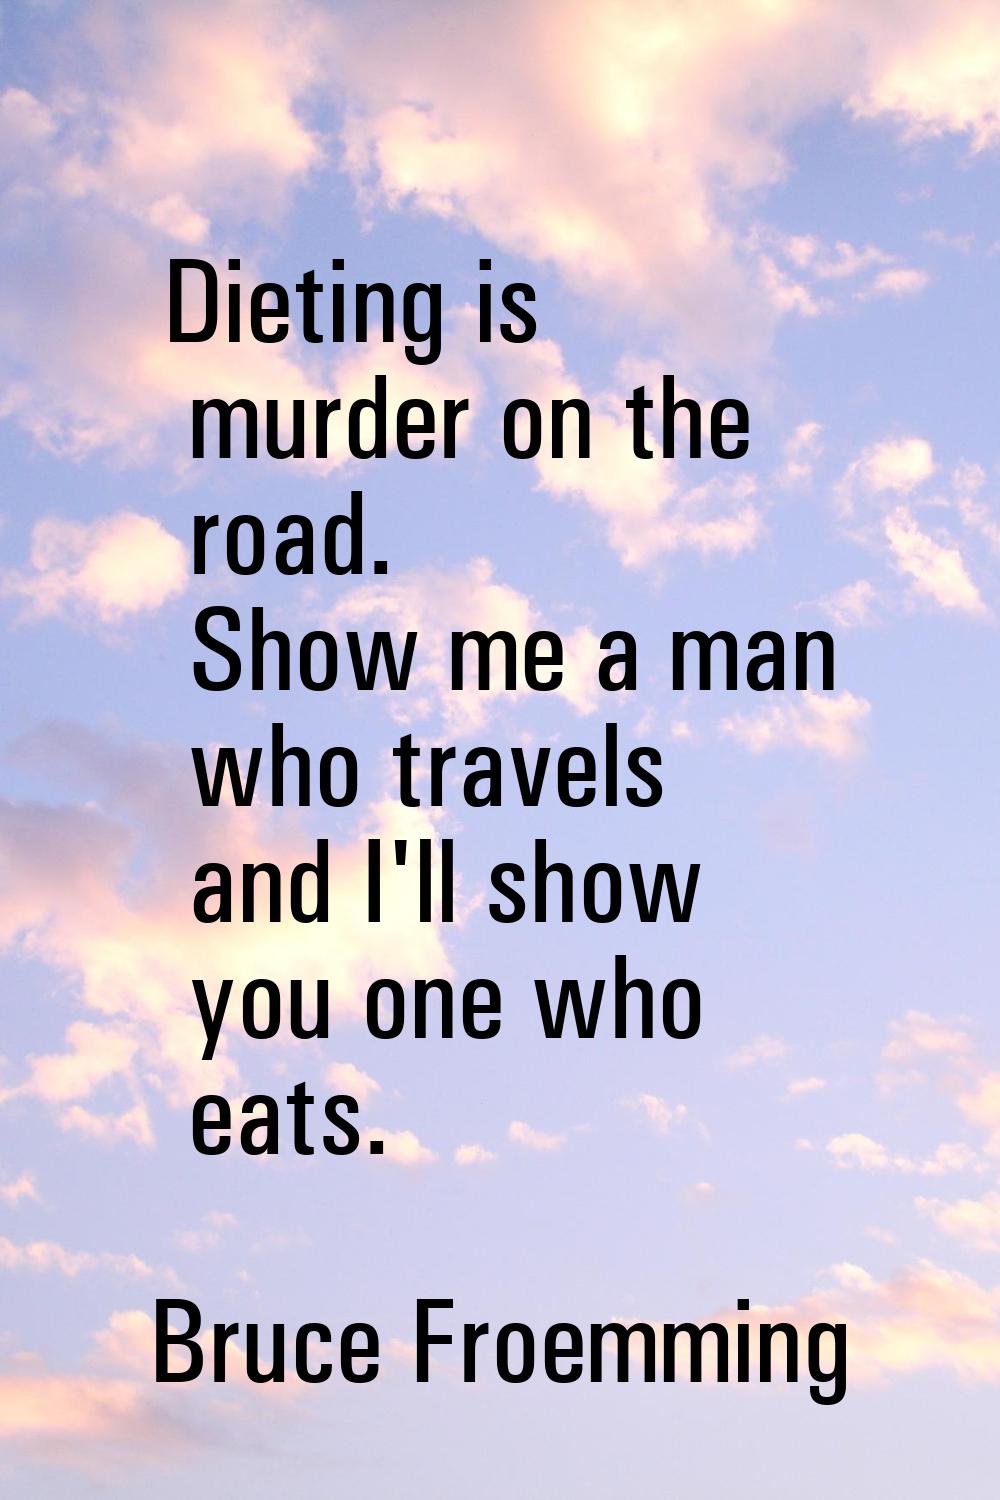 Dieting is murder on the road. Show me a man who travels and I'll show you one who eats.